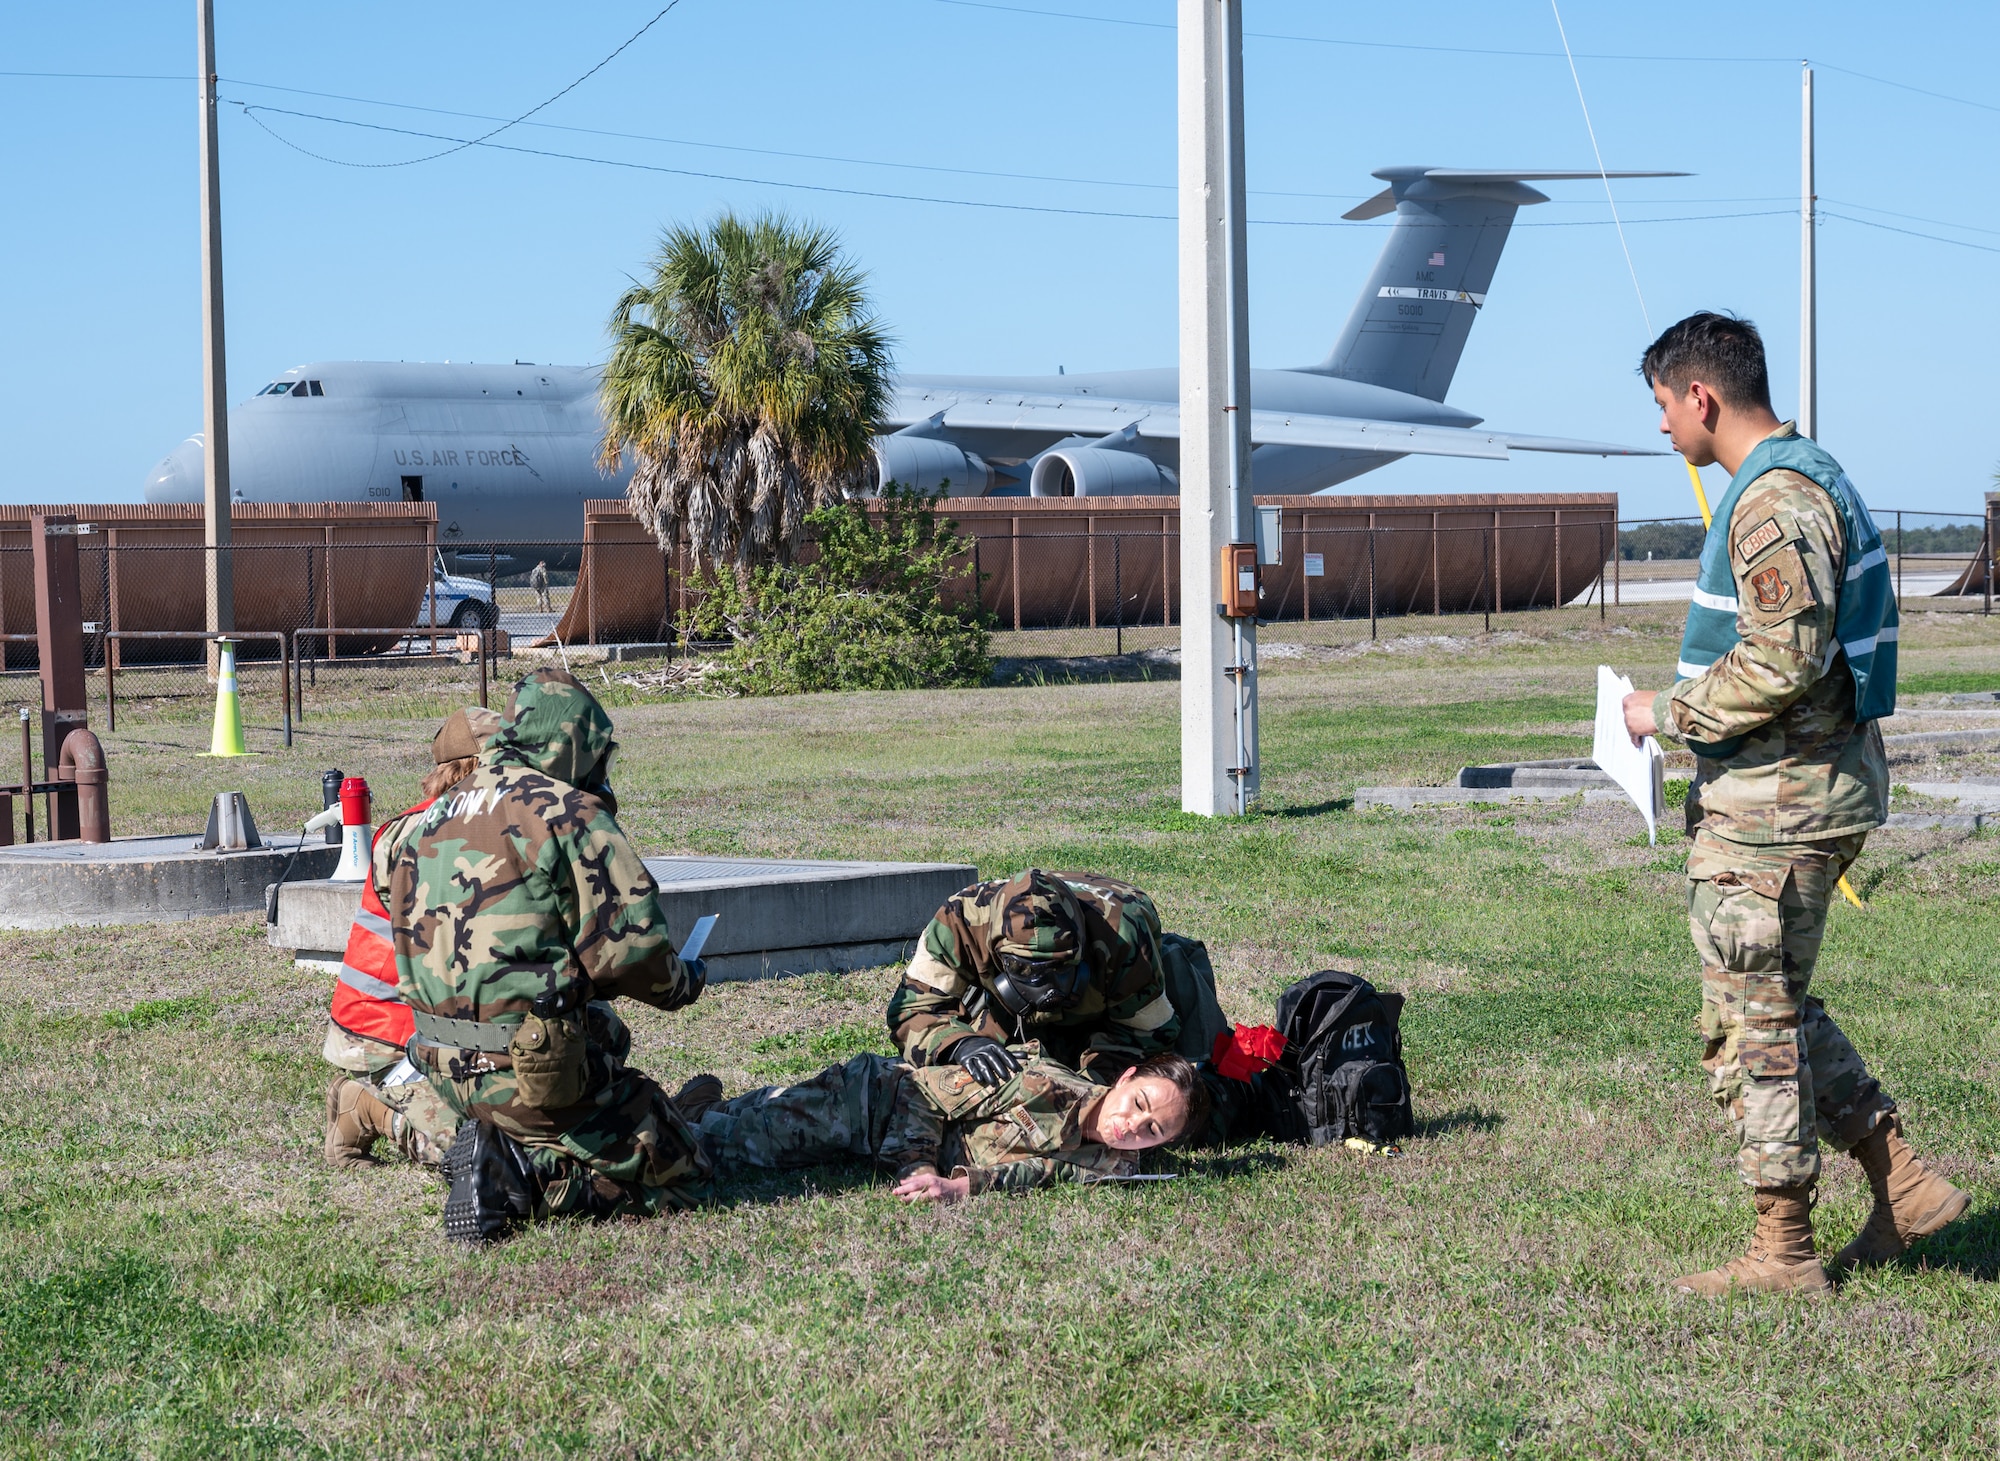 927th Mission Support Group Airmen perform tactical combat casualty care (TCCC) procedures on a simulated wounded service-member during an exercise on MacDill Air Force Base, Fla., Feb. 8, 2023. The exercise allowed Airmen to hone fundamental skills, such as TCCC, in a simulated contested environment, increasing overall readiness. (U.S. Air Force photo by Tech. Sgt. Bradley Tipton)